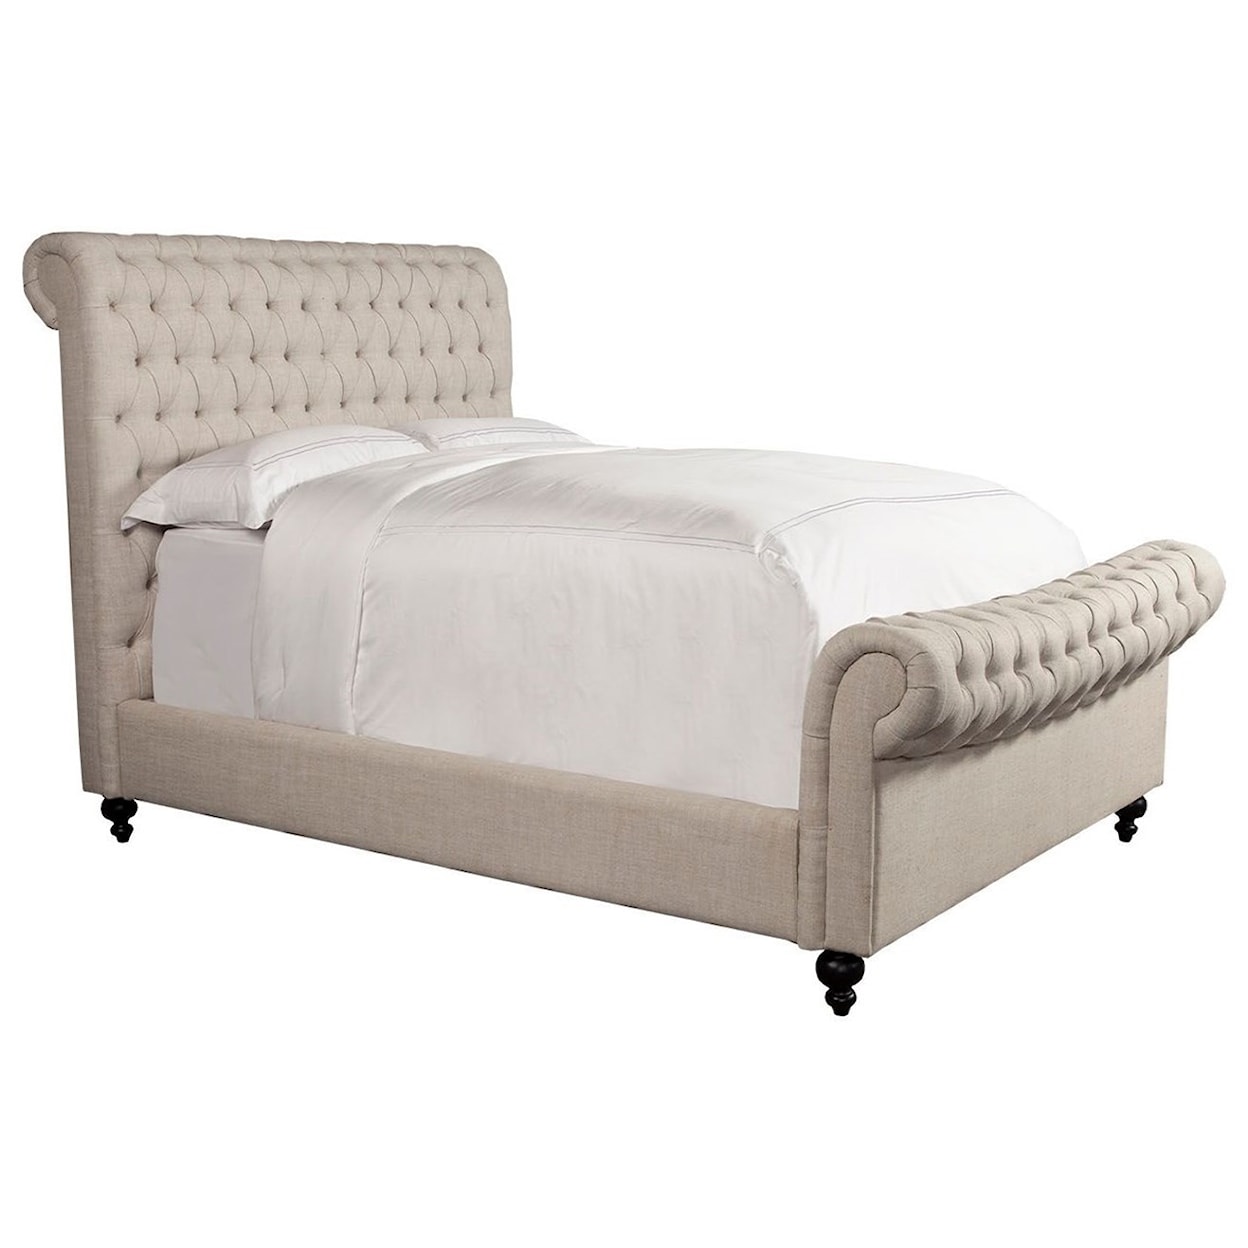 PH Jackie King Upholstered Sleigh Bed